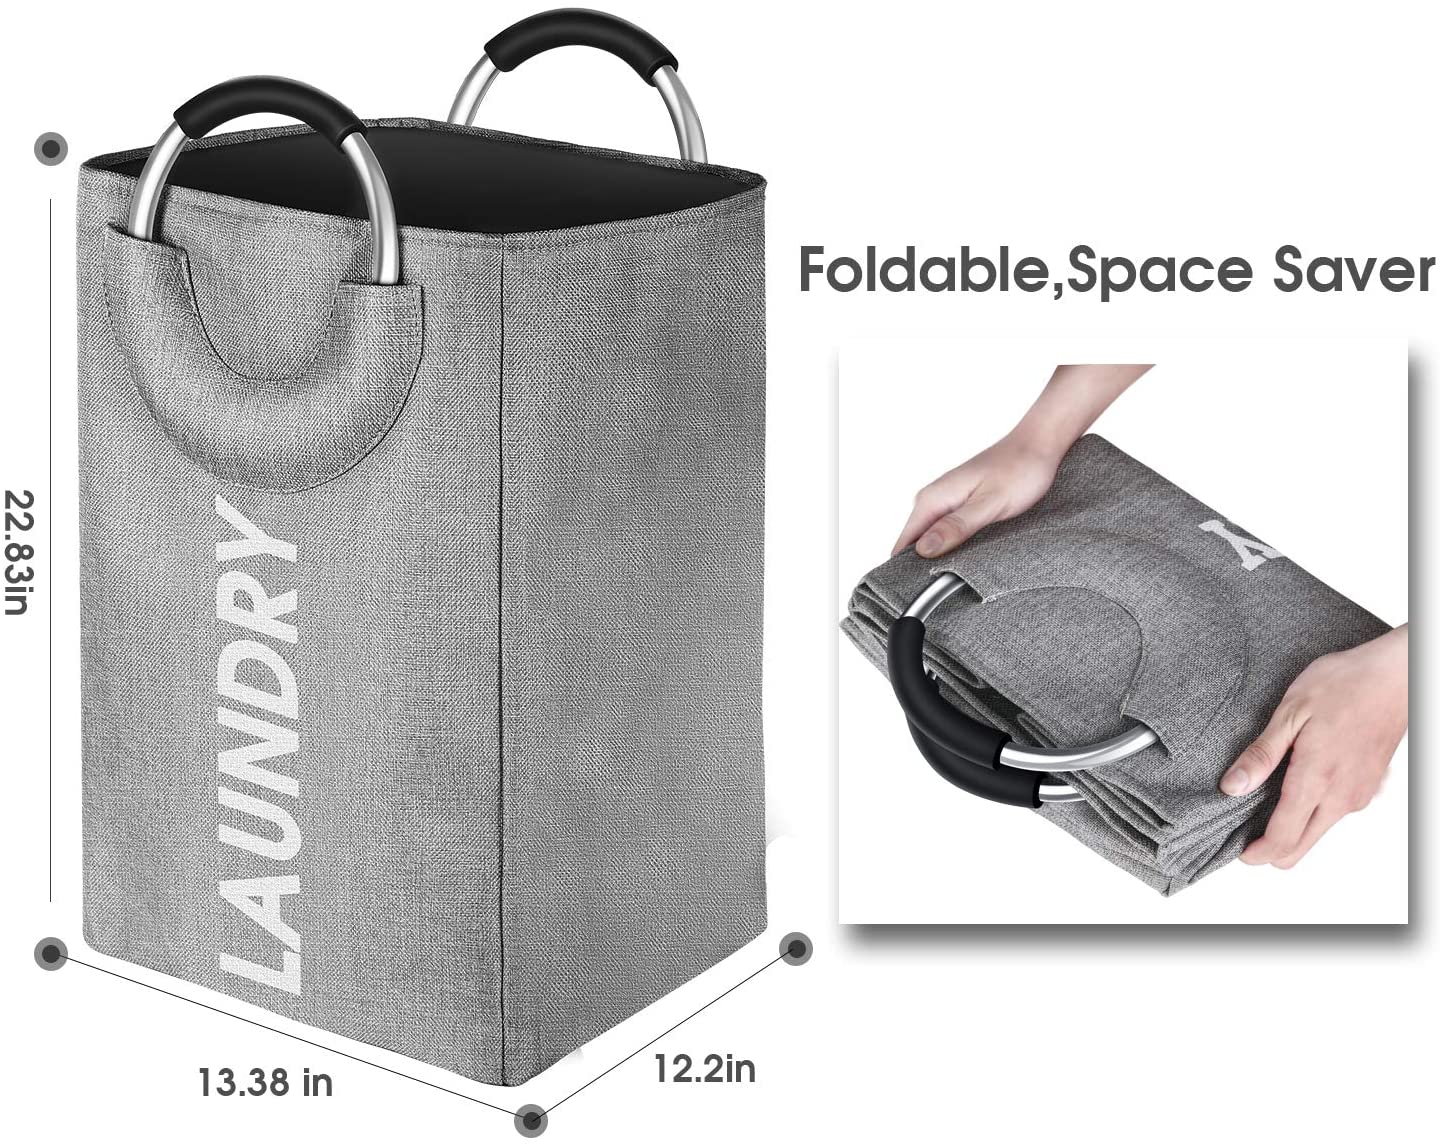 Foldable Laundry Bag: Store Linens, Clothes, Toys & More!